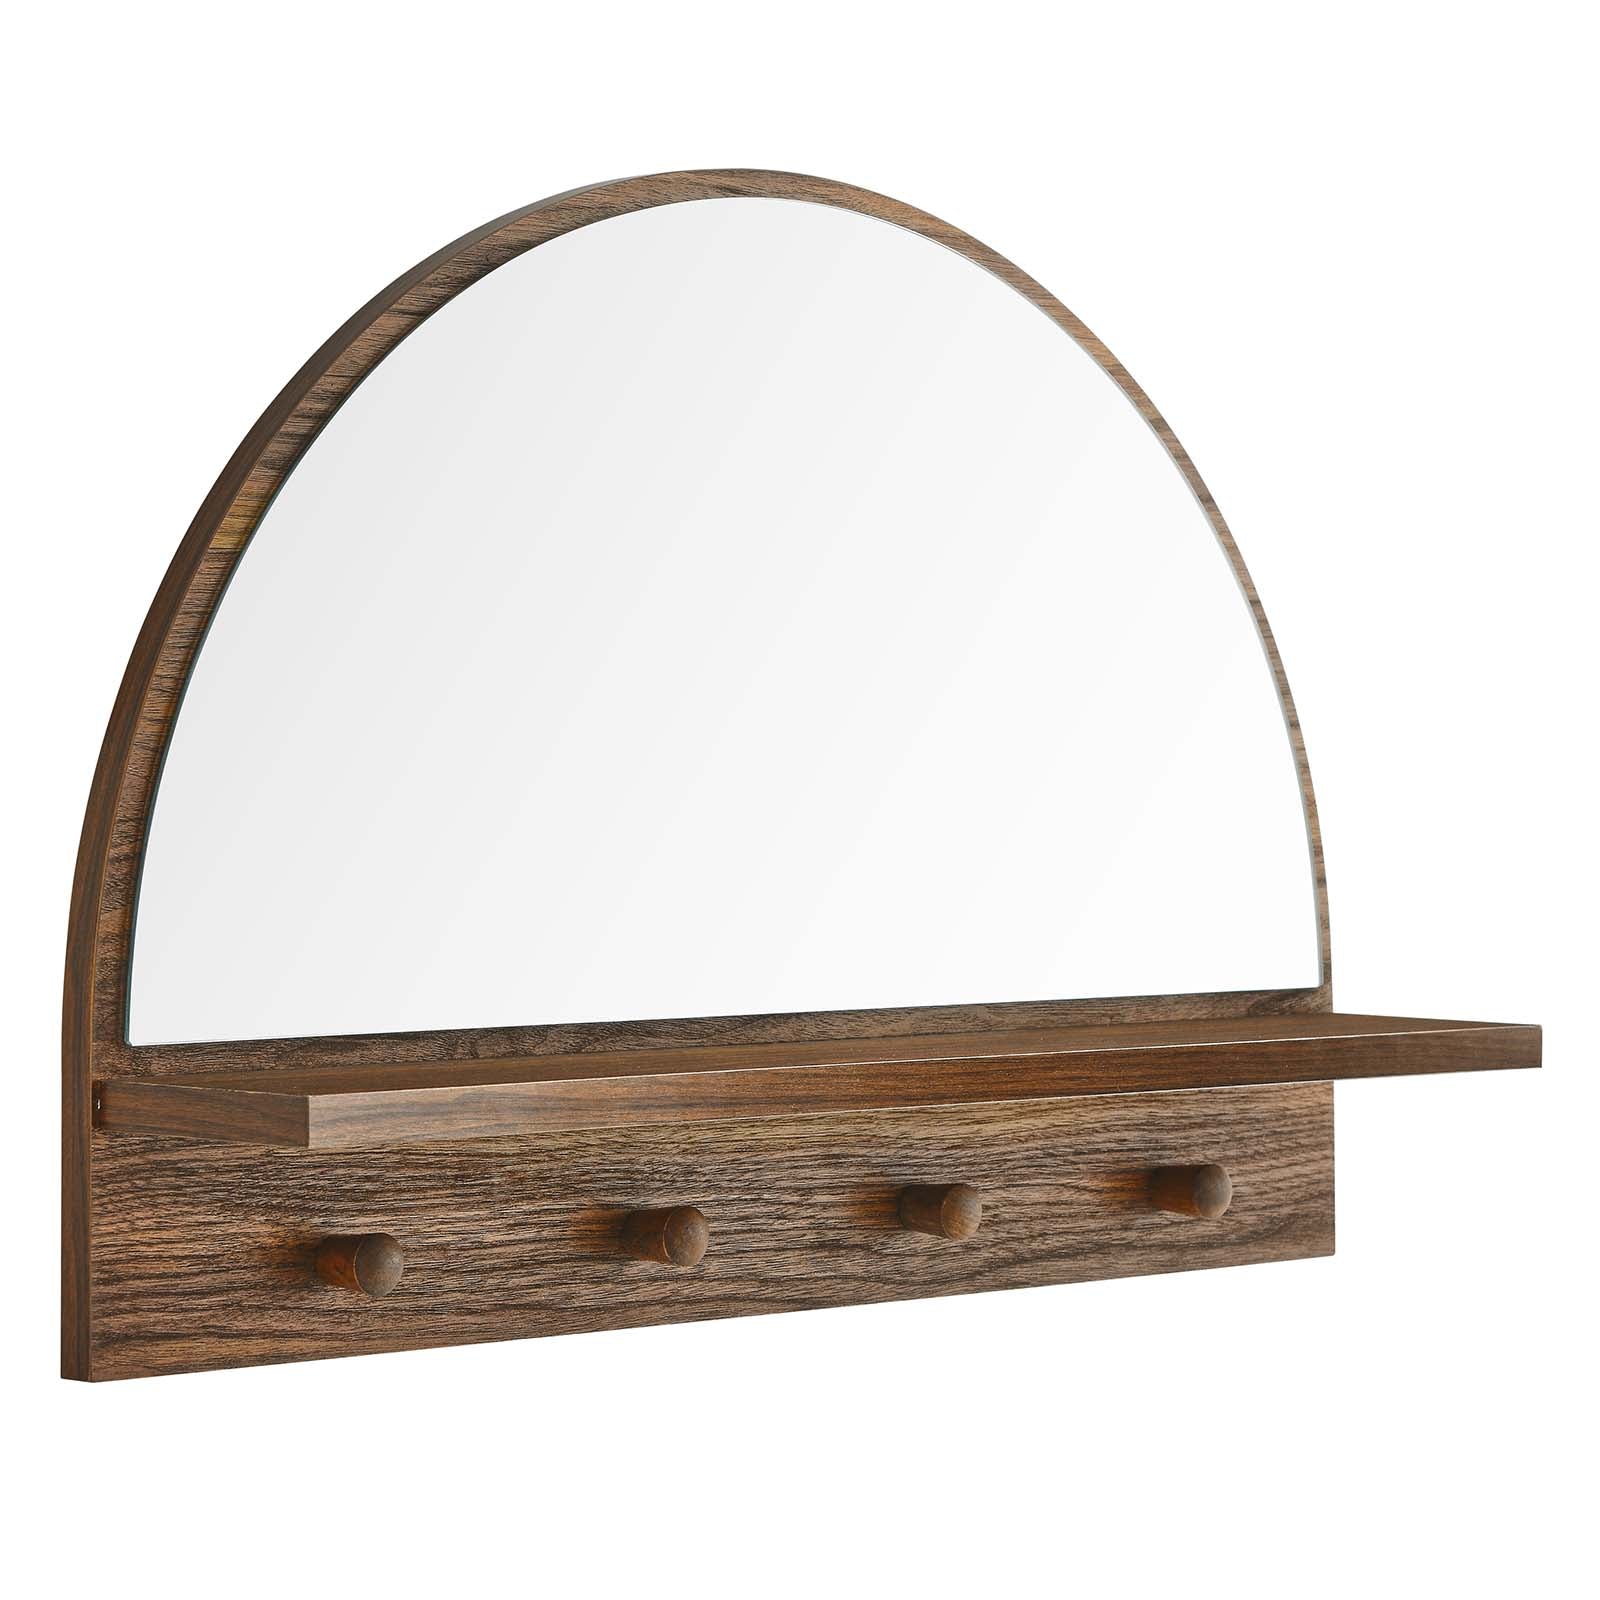 Moonbeam Arched Mirror - East Shore Modern Home Furnishings